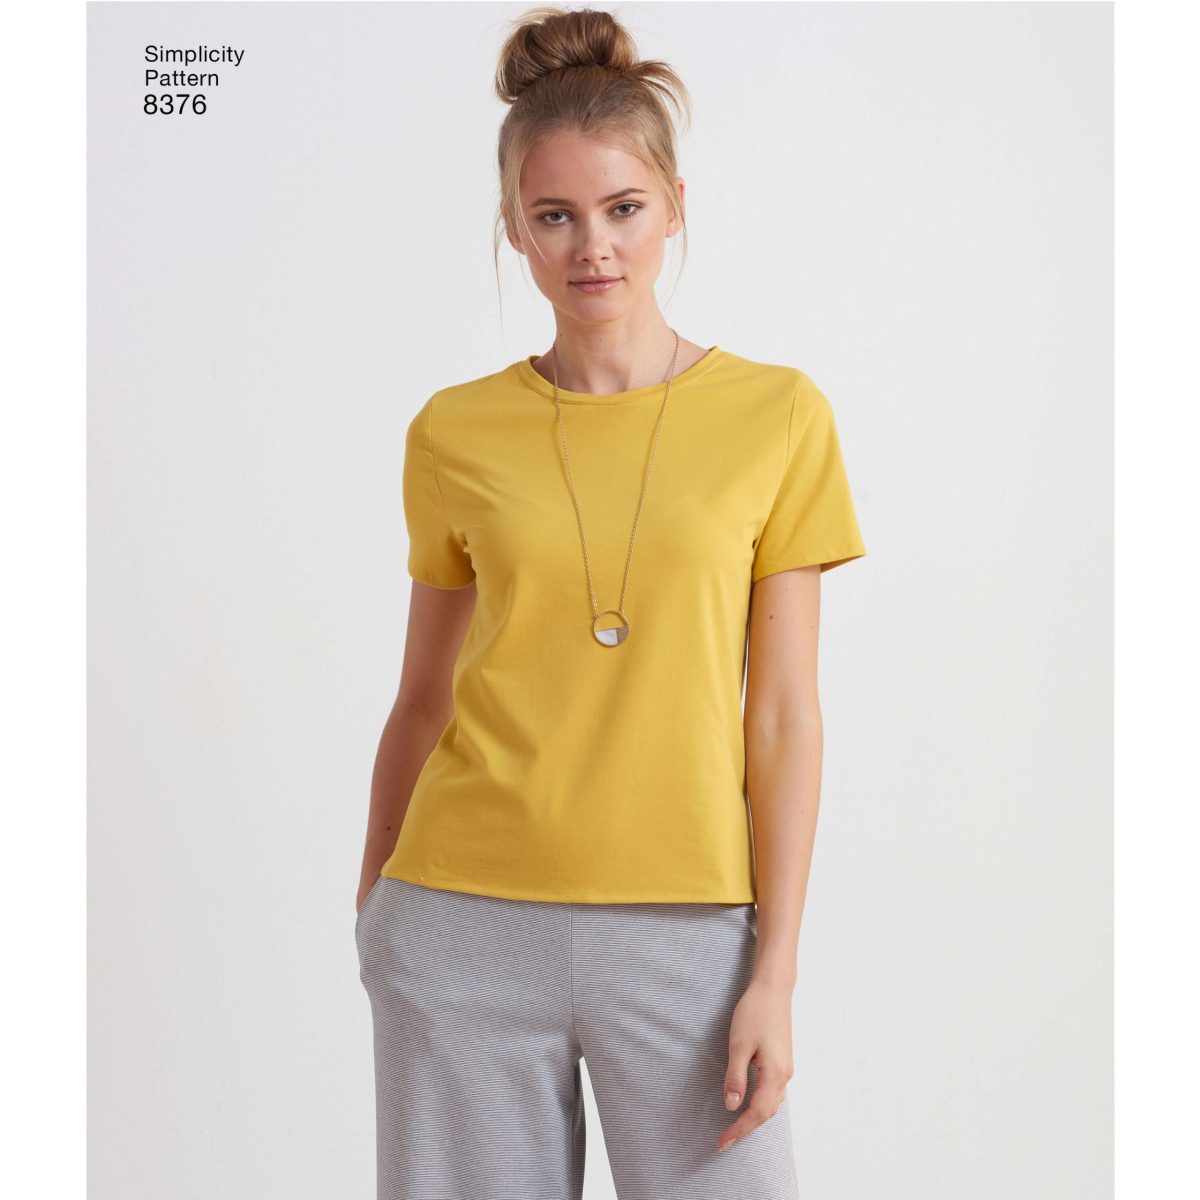 Simplicity Pattern 8376 Misses' Knit Top with Multiple Pieces for Design Hacking